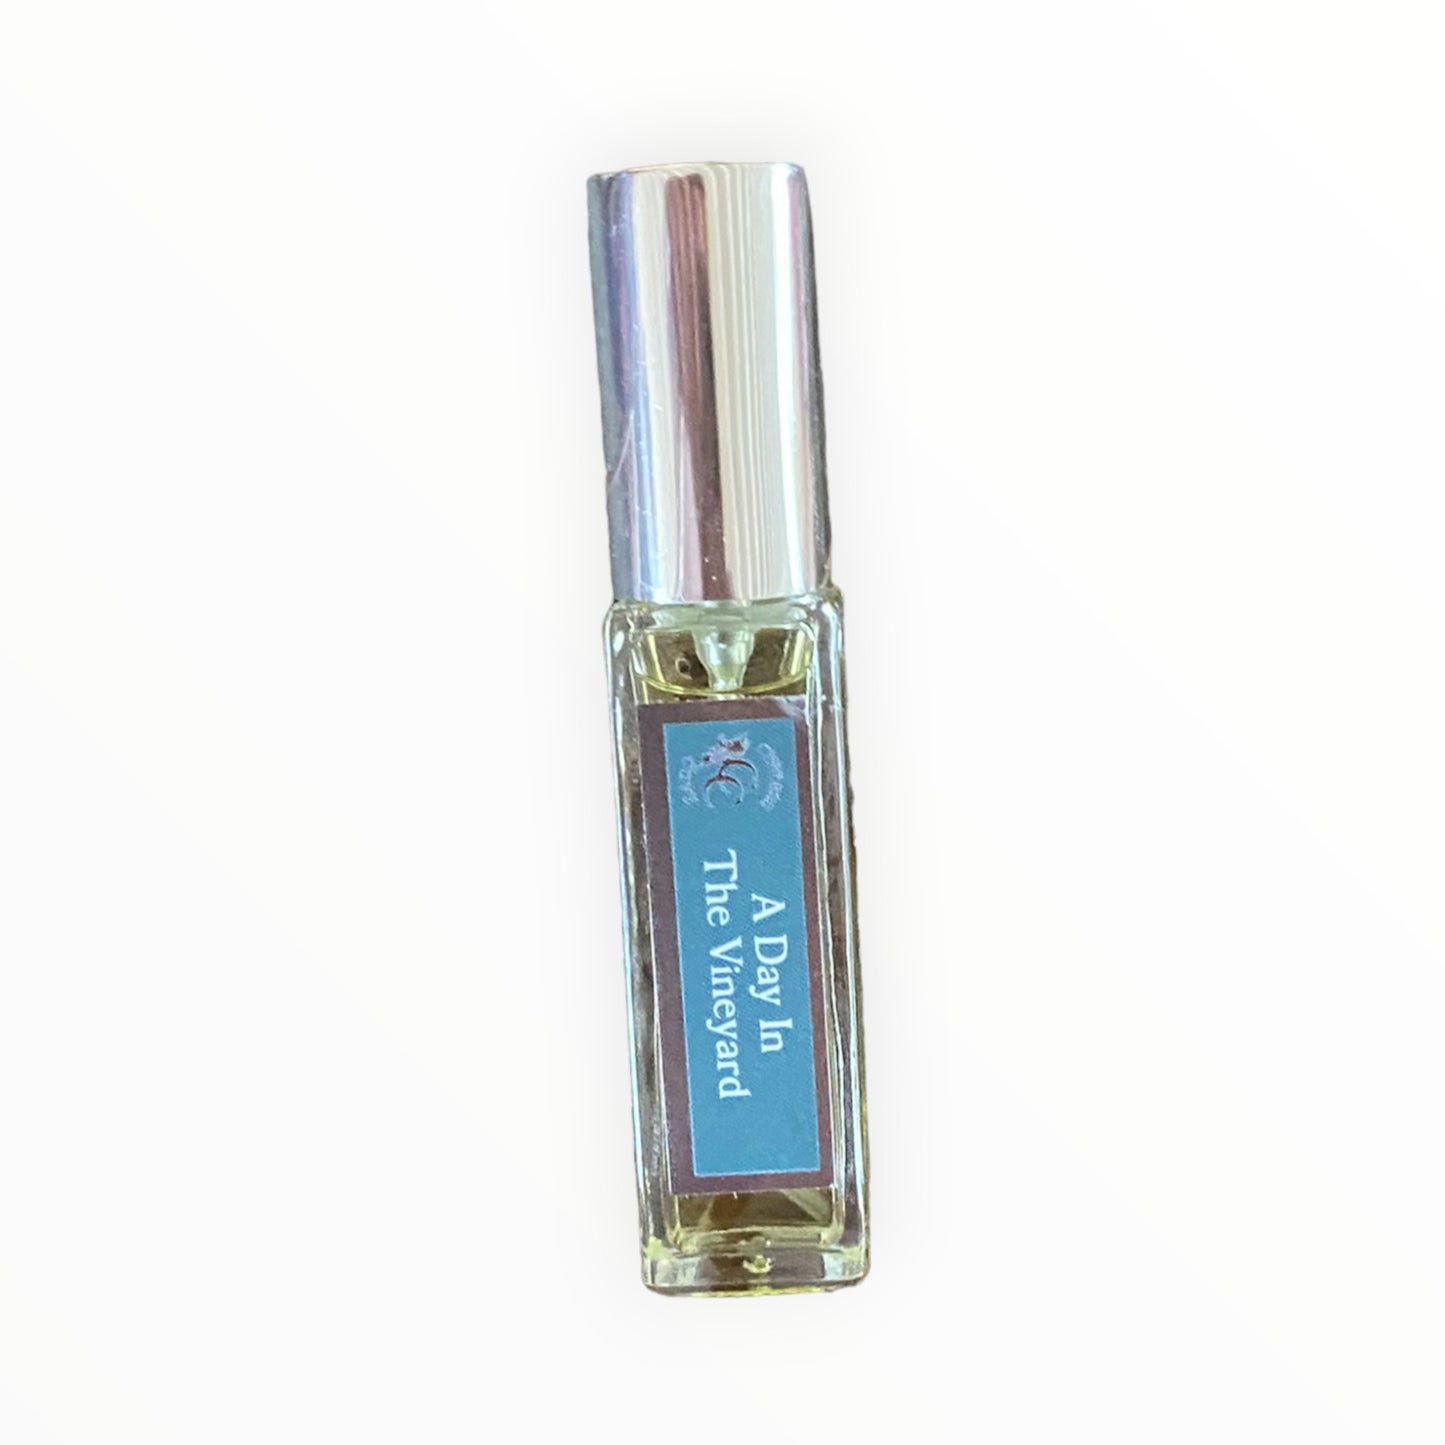 A Day in The Vineyard EDT Travel Vial 10ml